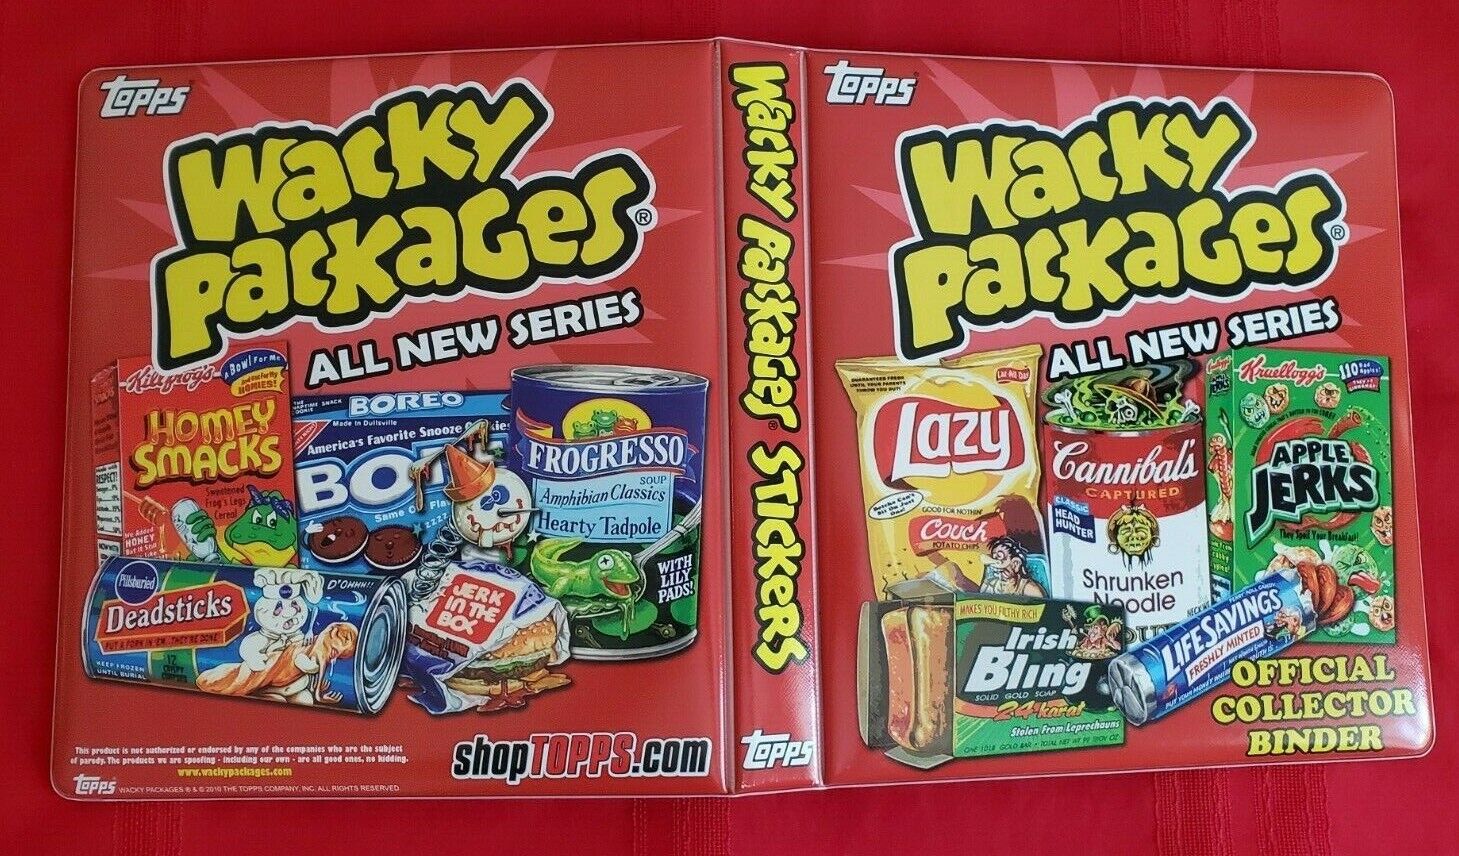 2010 TOPPS WACKY PACKAGES ALL NEW SERIES OFFICIAL RED BINDER   @@ RARE @@